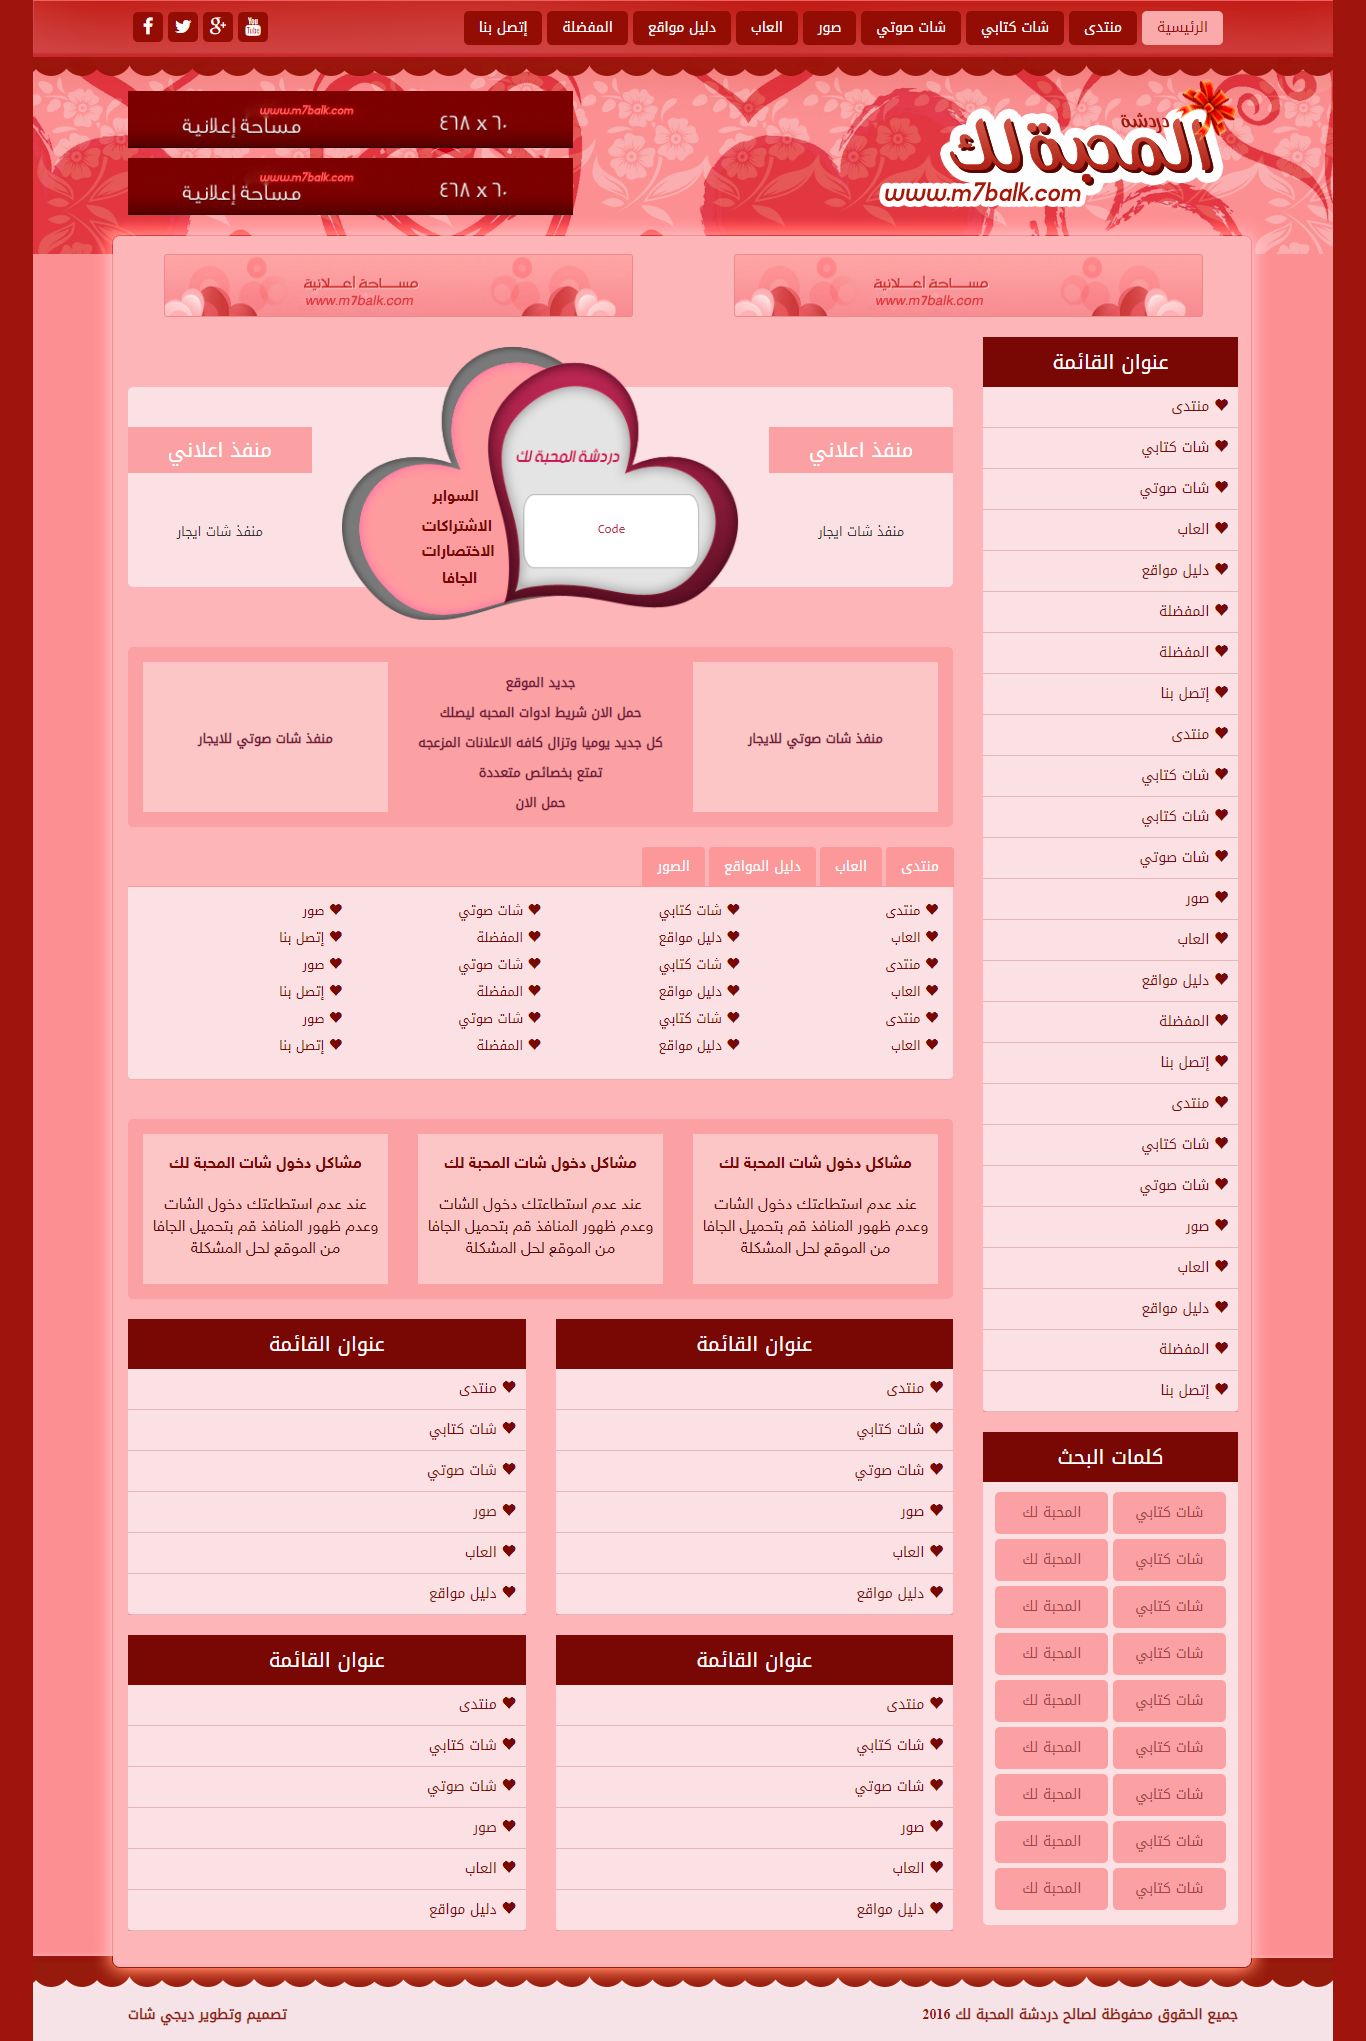 Love chat website design for you